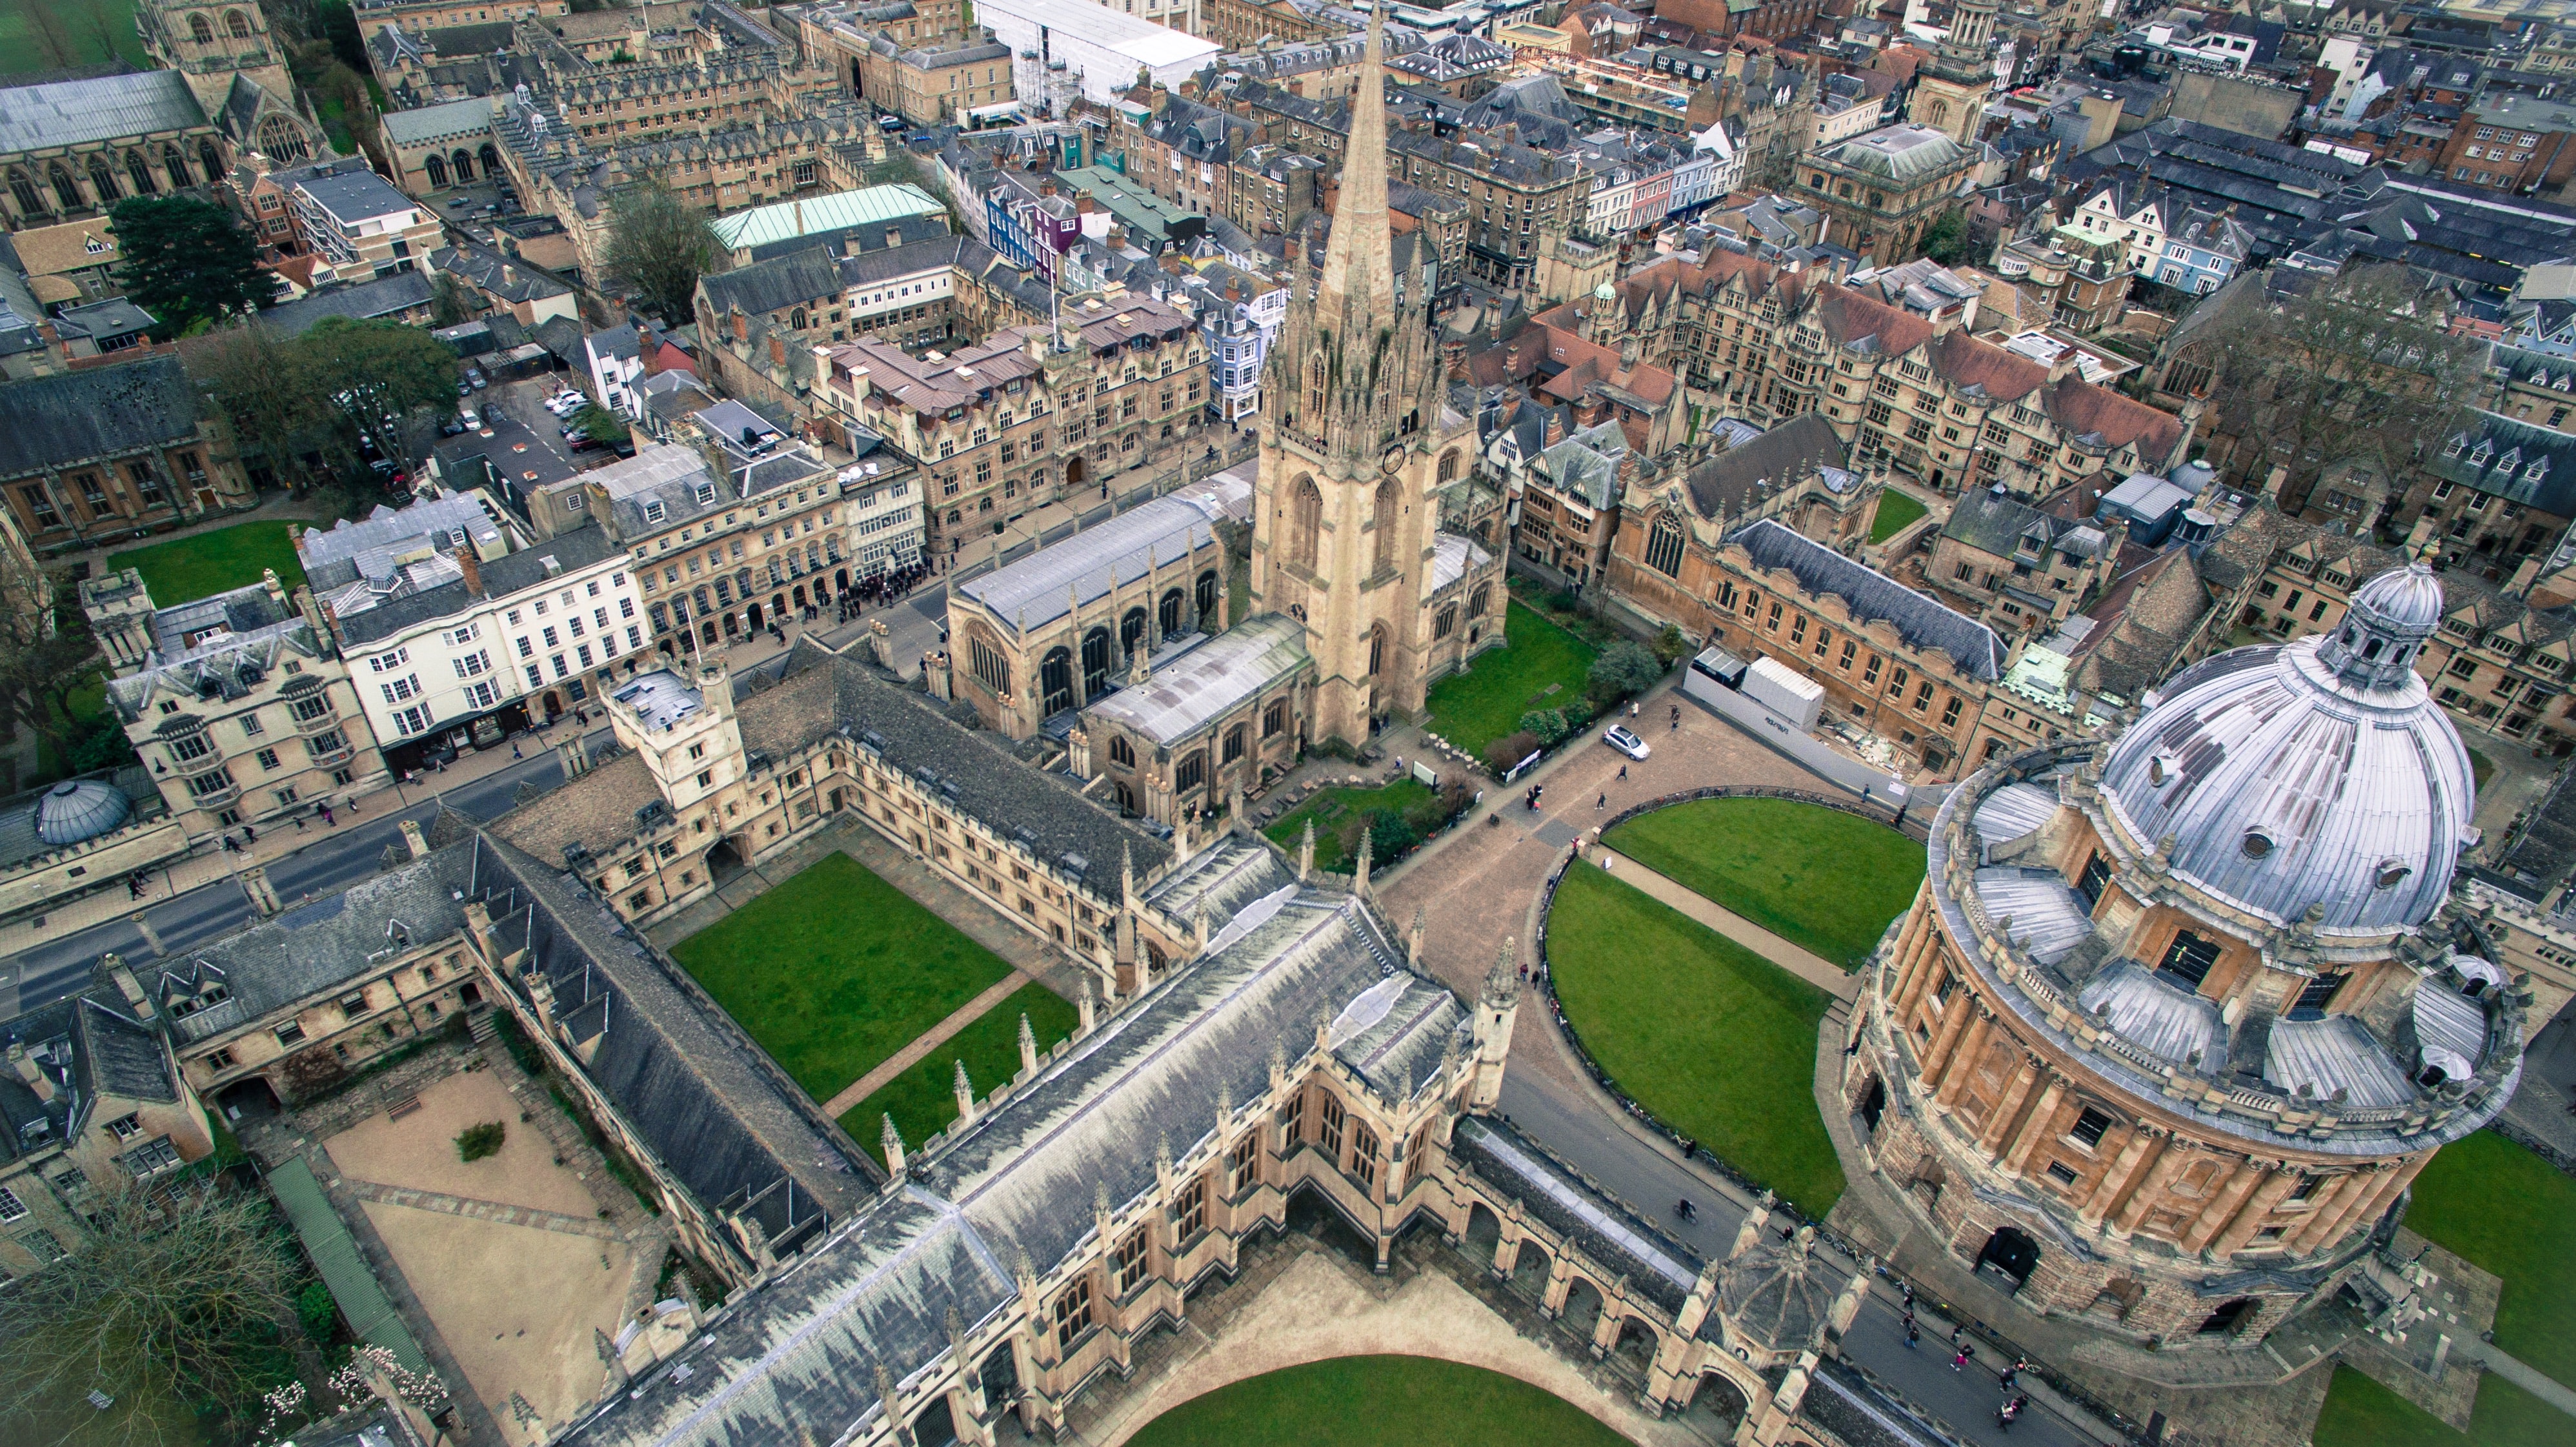 Oxford: A hotbed of innovation, technology and cutting-edge research